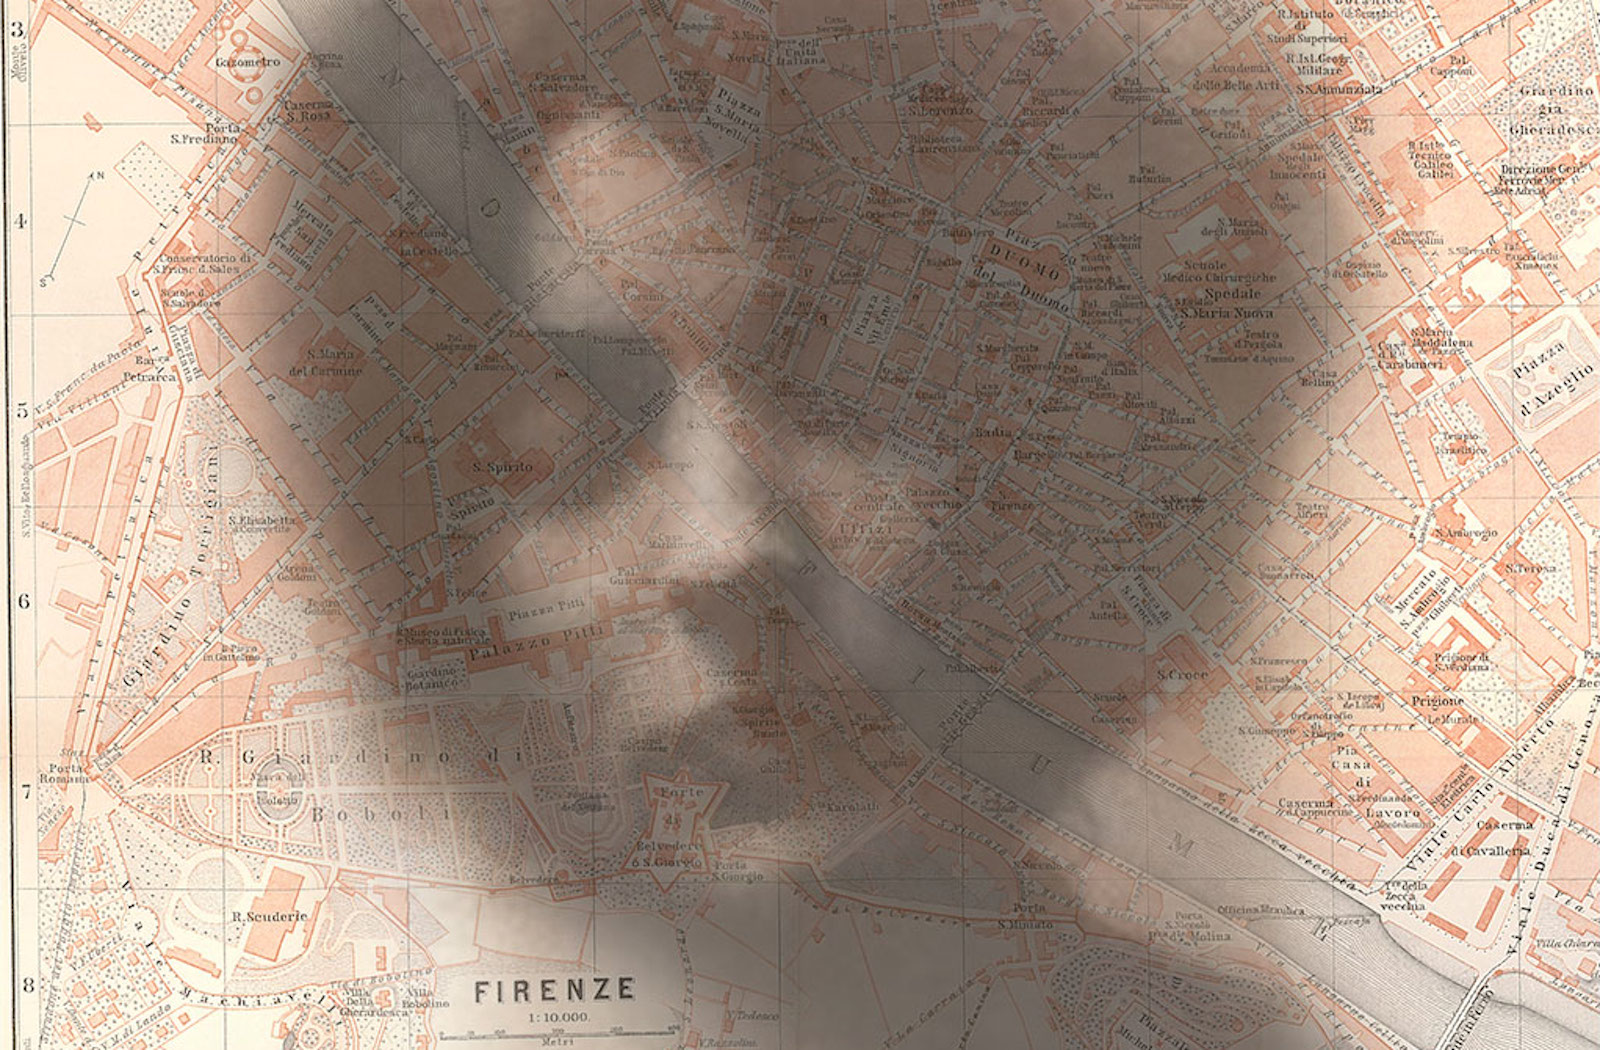 Head shot of Loy superimposed on Florence Baedeker Map